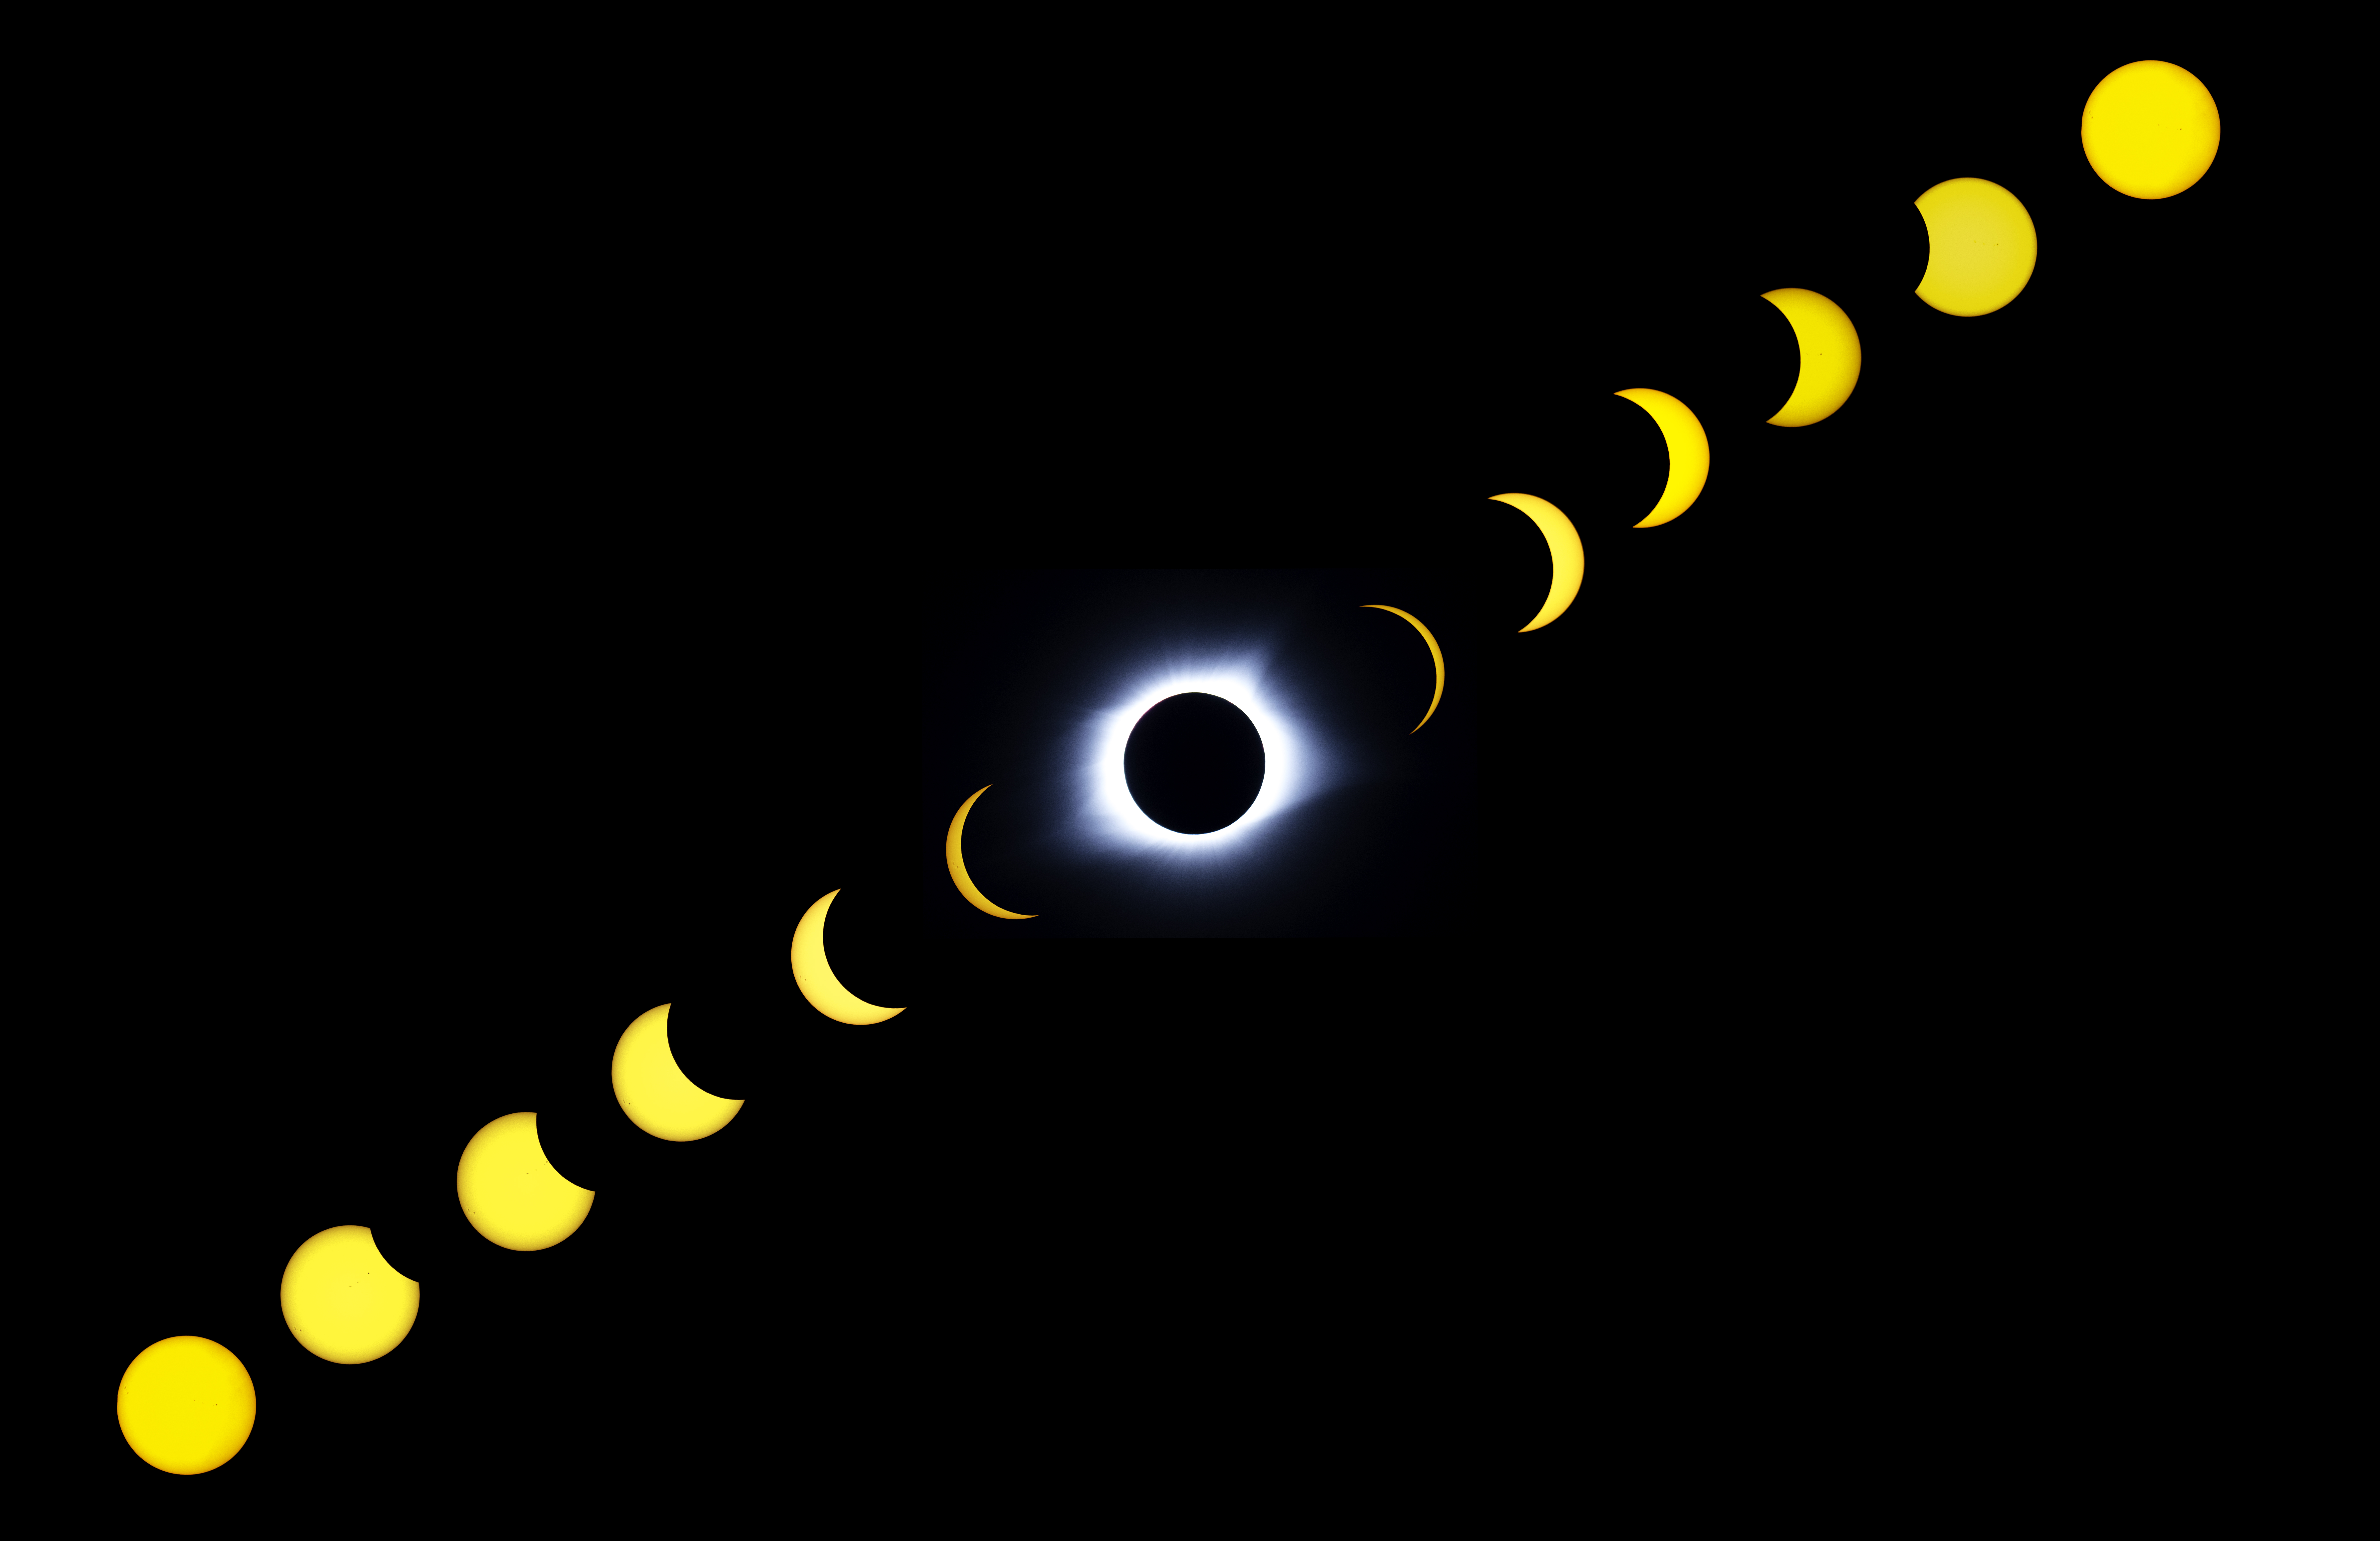 A composite image taken from outside Allen County-Scottsville High School (Allen County) shows the Aug. 21 solar eclipse before, during and after totality. Students at four Allen County schools viewed the eclipse during the school day, and teachers and administrators planned for months to make the event a safe, memorable and educational experience for the students. Photo by Bobby Ellis, Aug. 21, 2017